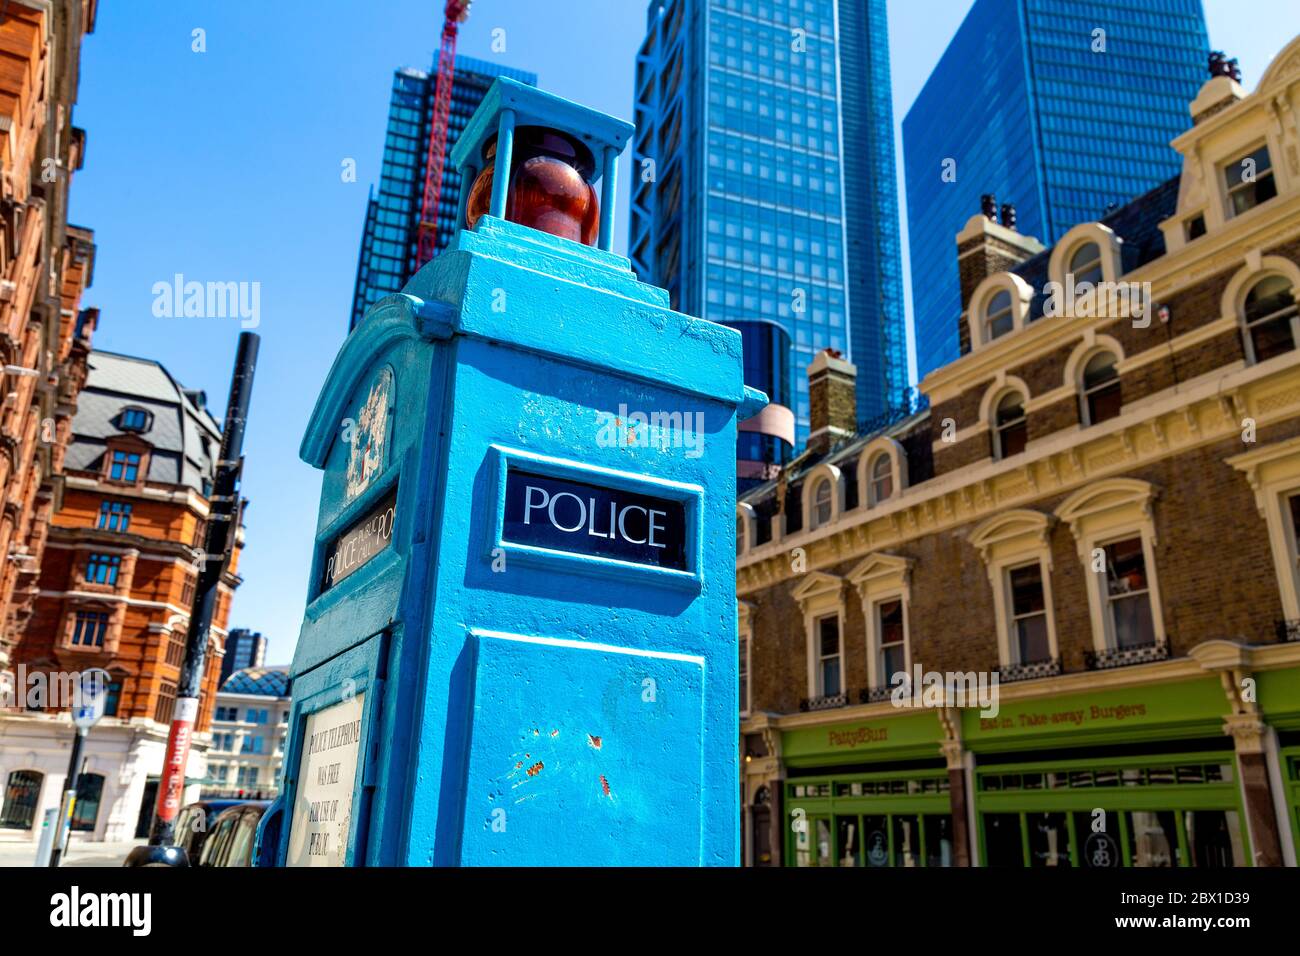 Blue police telephone box in Liverpool Street that memebers of the public in the 20th century could use to call the police, London, UK Stock Photo